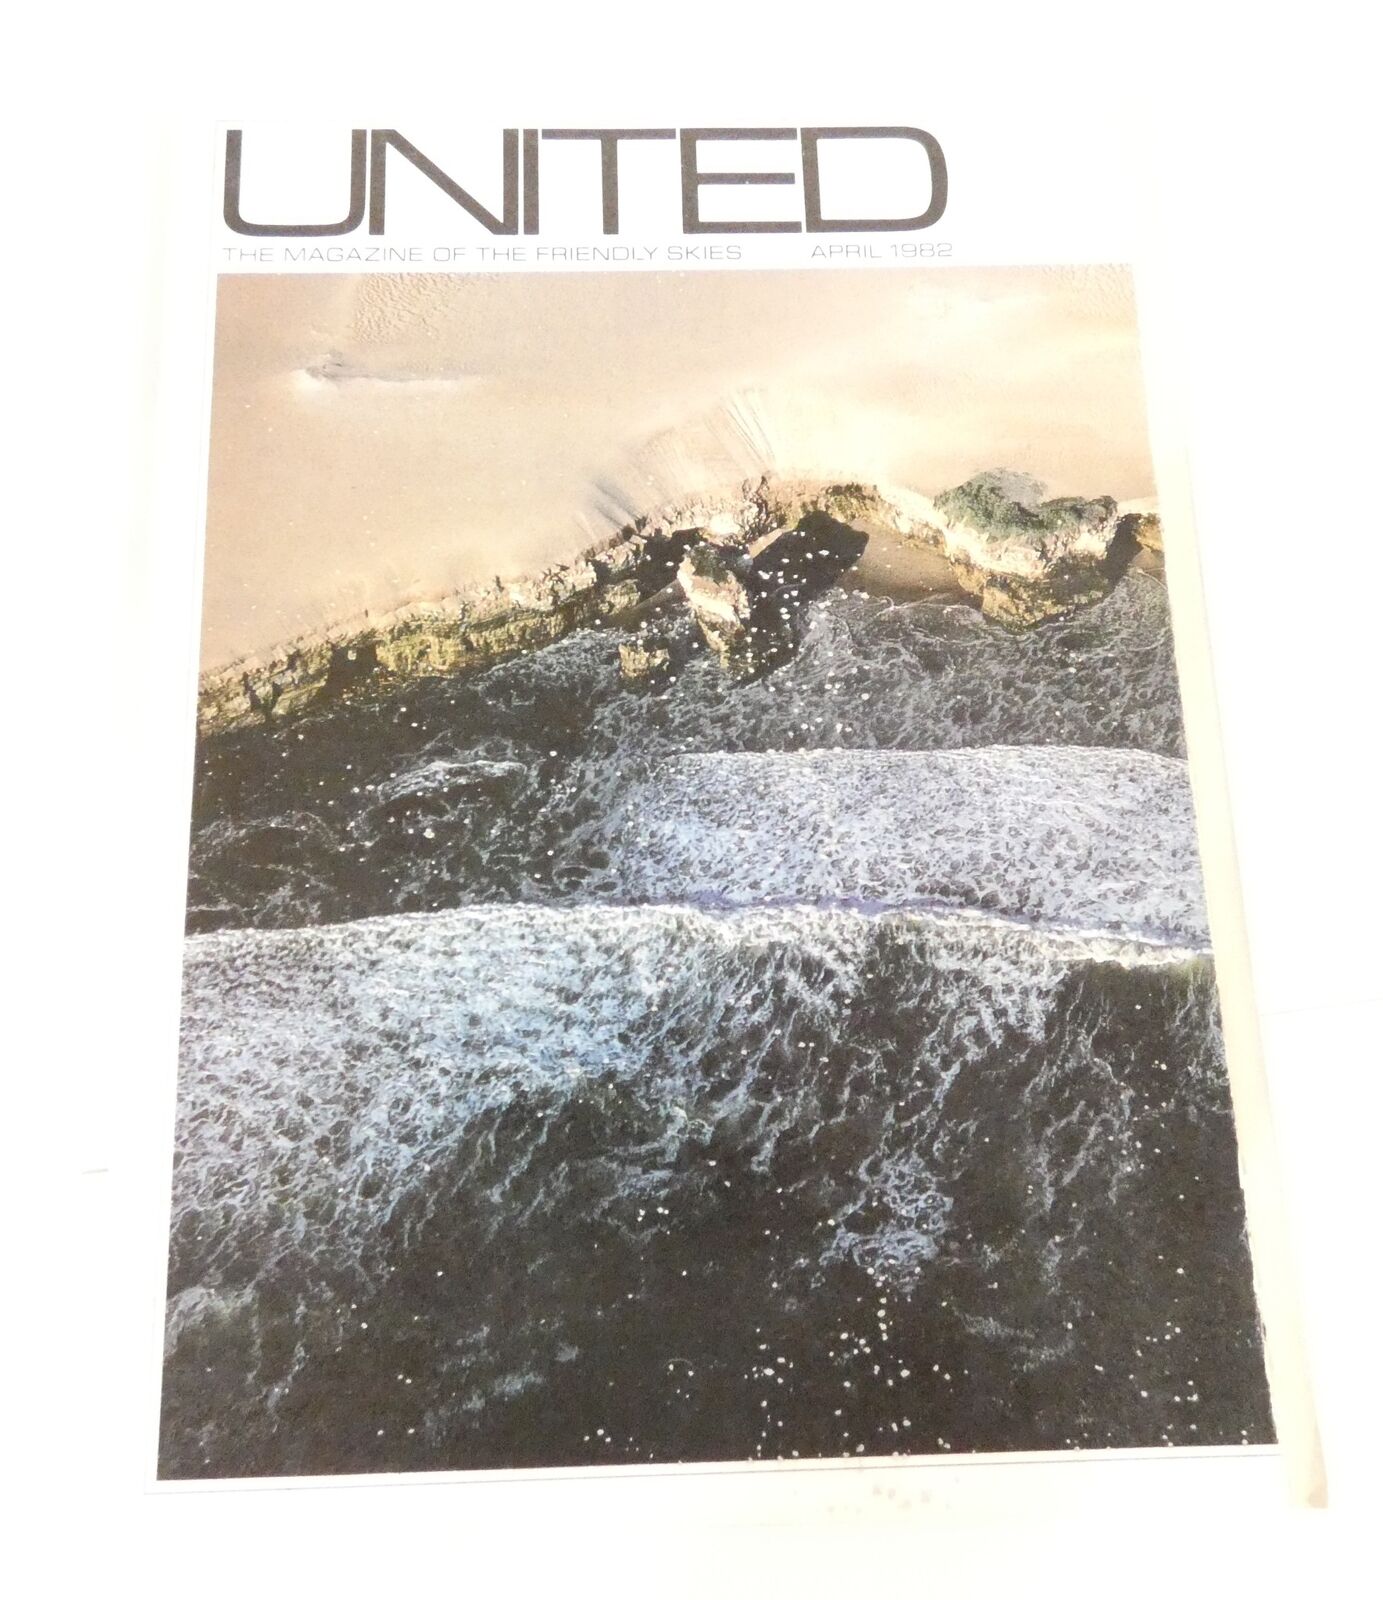 VINTAGE UNITED THE MAGAZINE OF THE FRIENDLY SKIES APRIL 1982